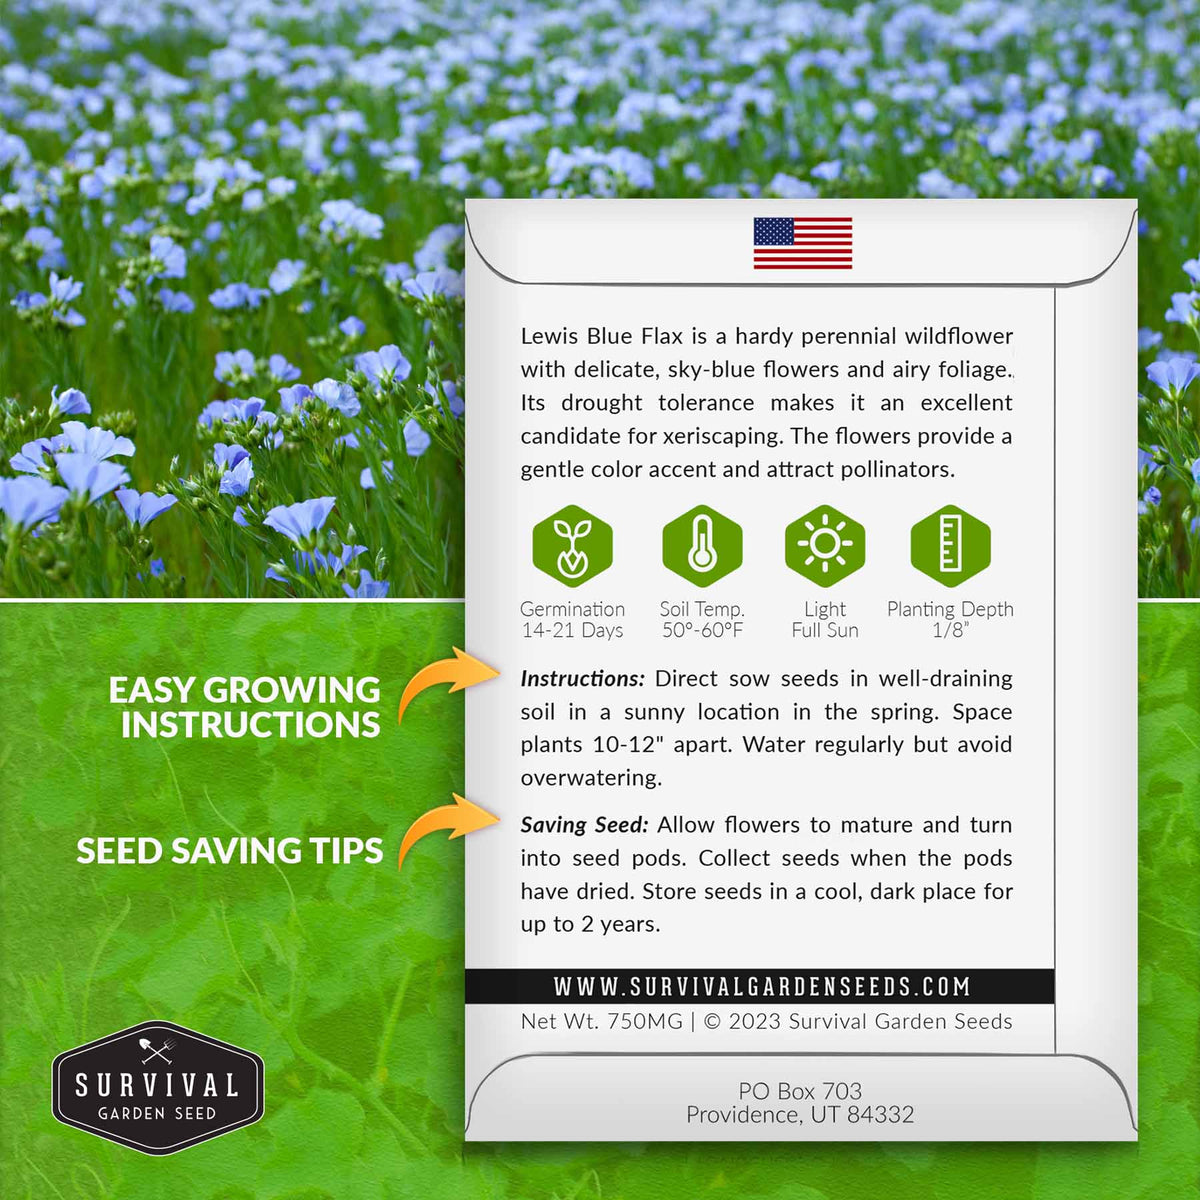 Lewis Blue Flas seed planting instructions